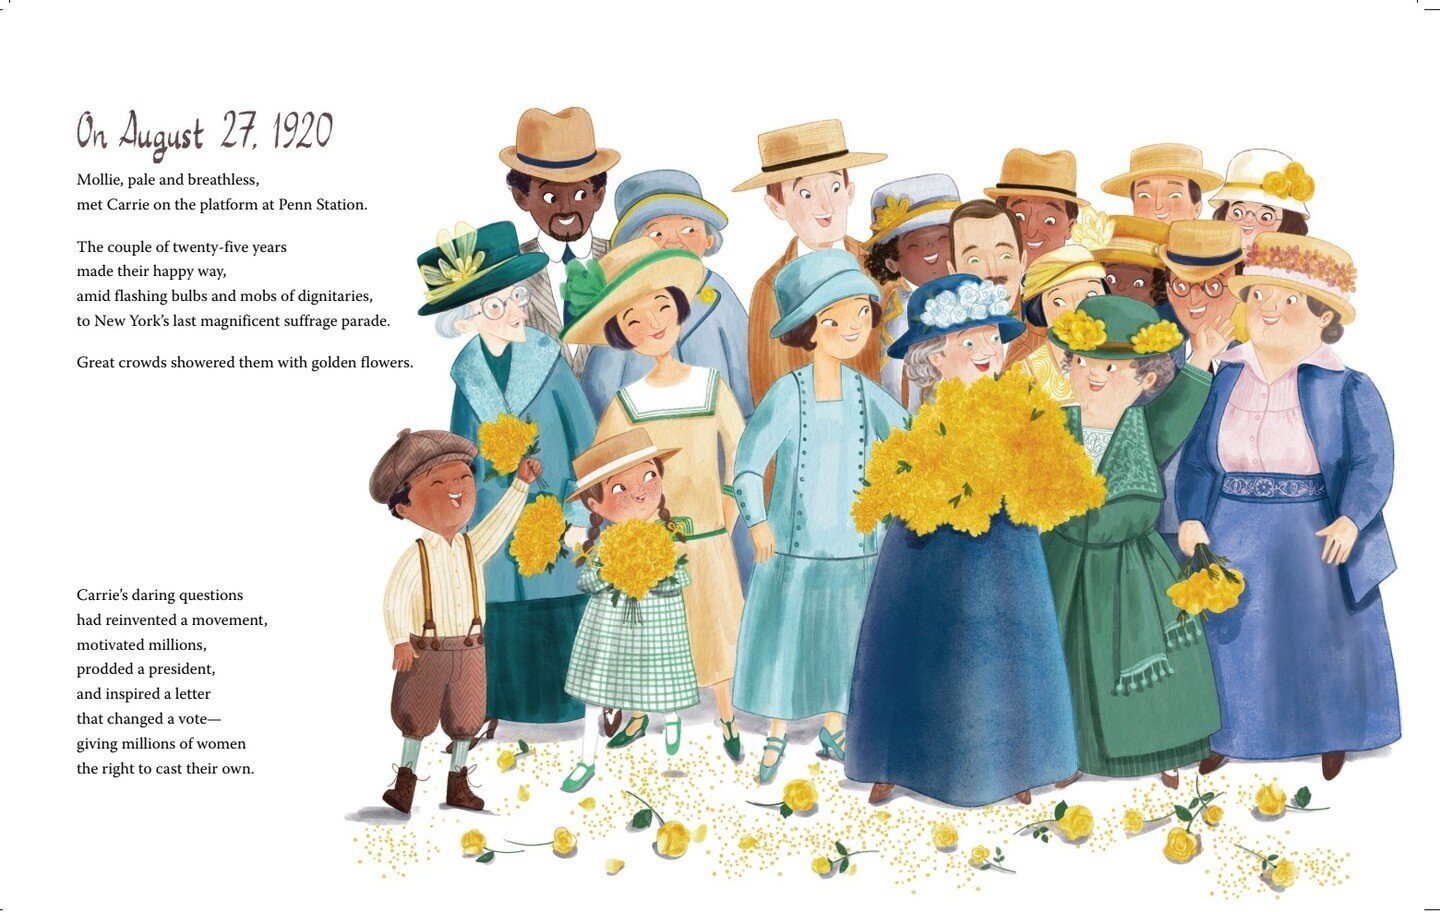 This is my favorite spread in the book; based on my favorite photo of Carrie. ⁠
⁠
In the photo, Carrie is holding an enormous bouquet of flowers, beaming, during the last great suffrage parade of NY, just after the amendment has been ratified.⁠
⁠
&qu